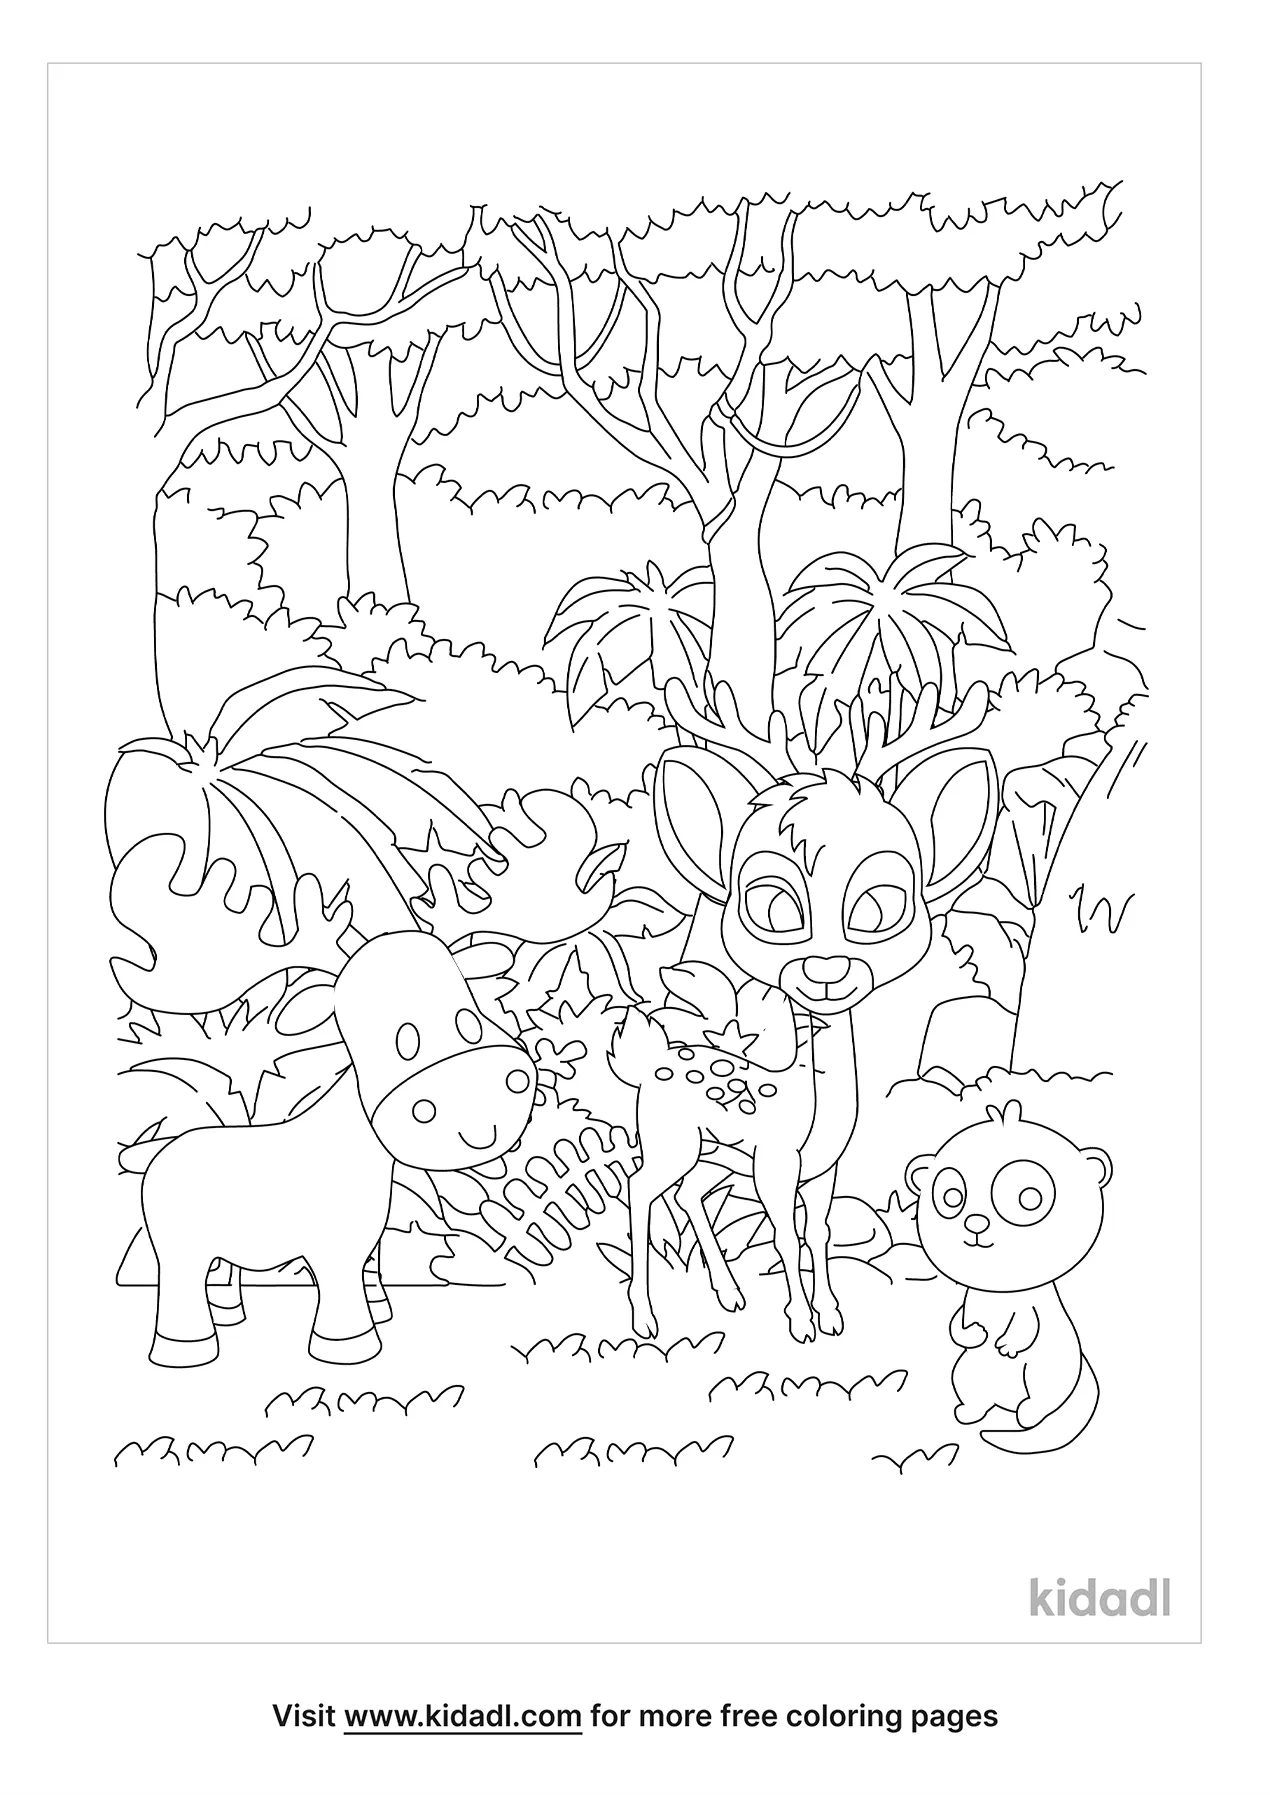 Free Forest Of Animals Coloring Page | Coloring Page Printables | Kidadl